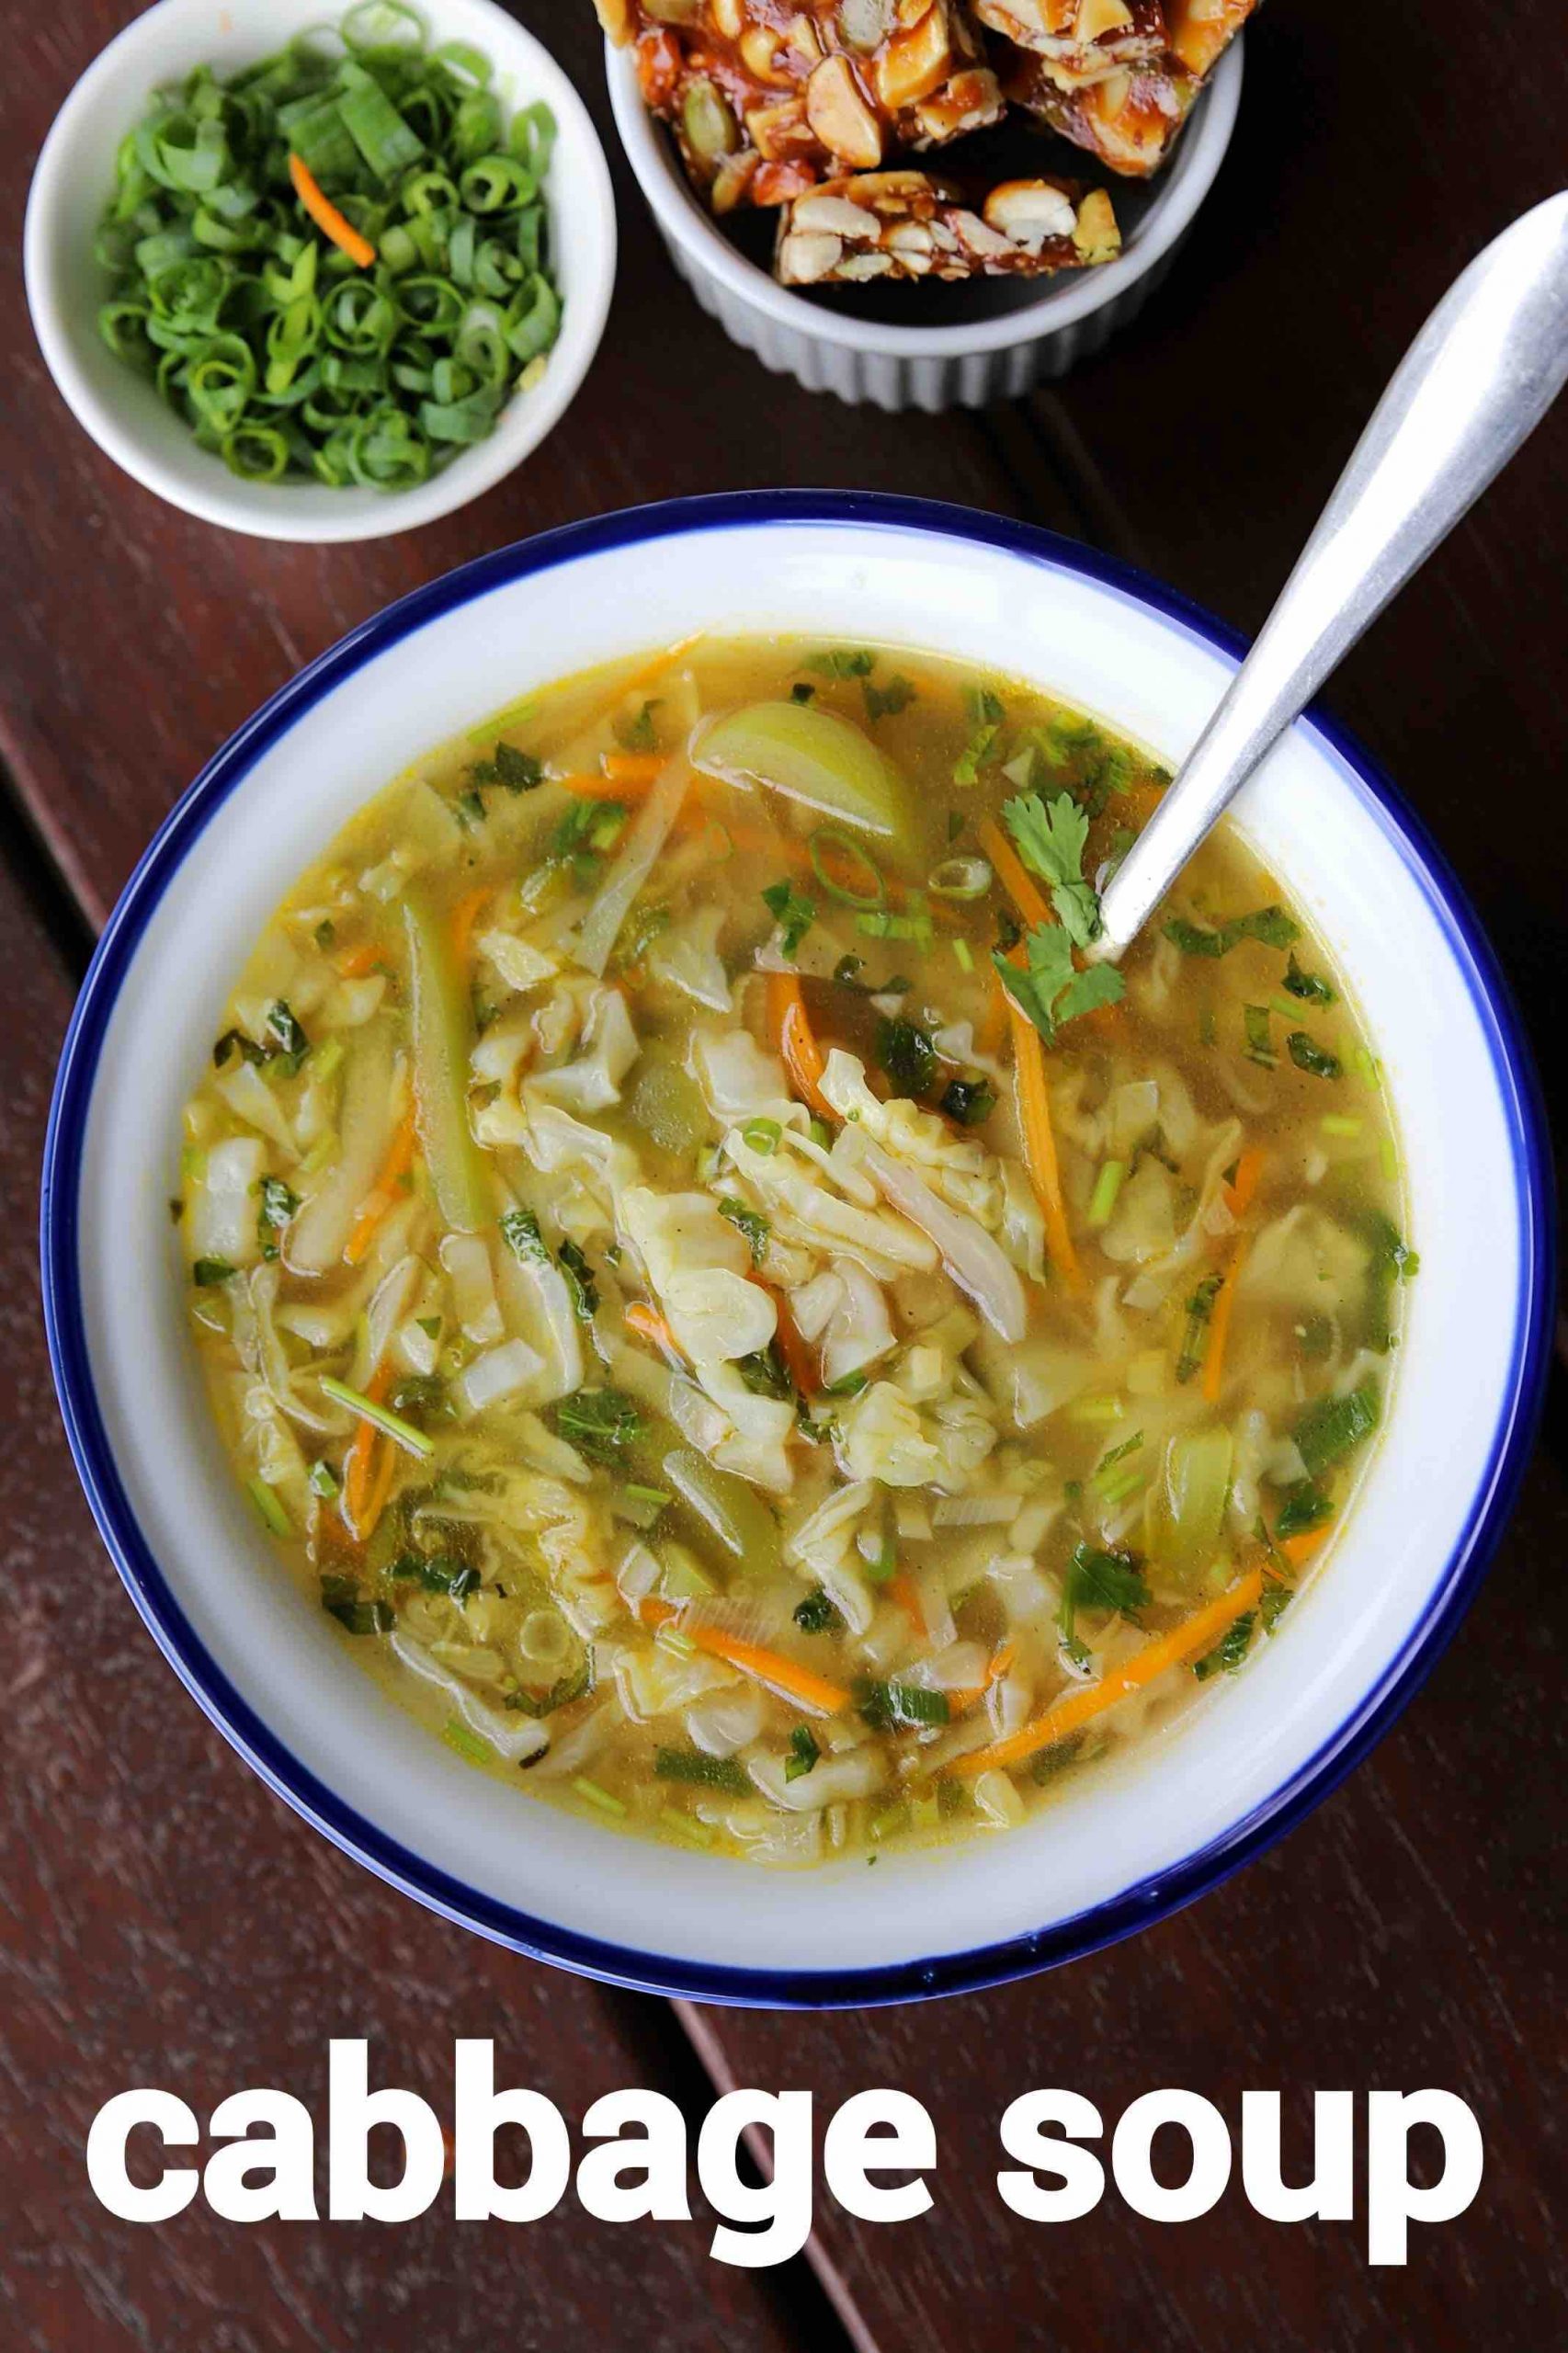 cabbage soup recipe | vegetable soup with cabbage | cabbage soup diet